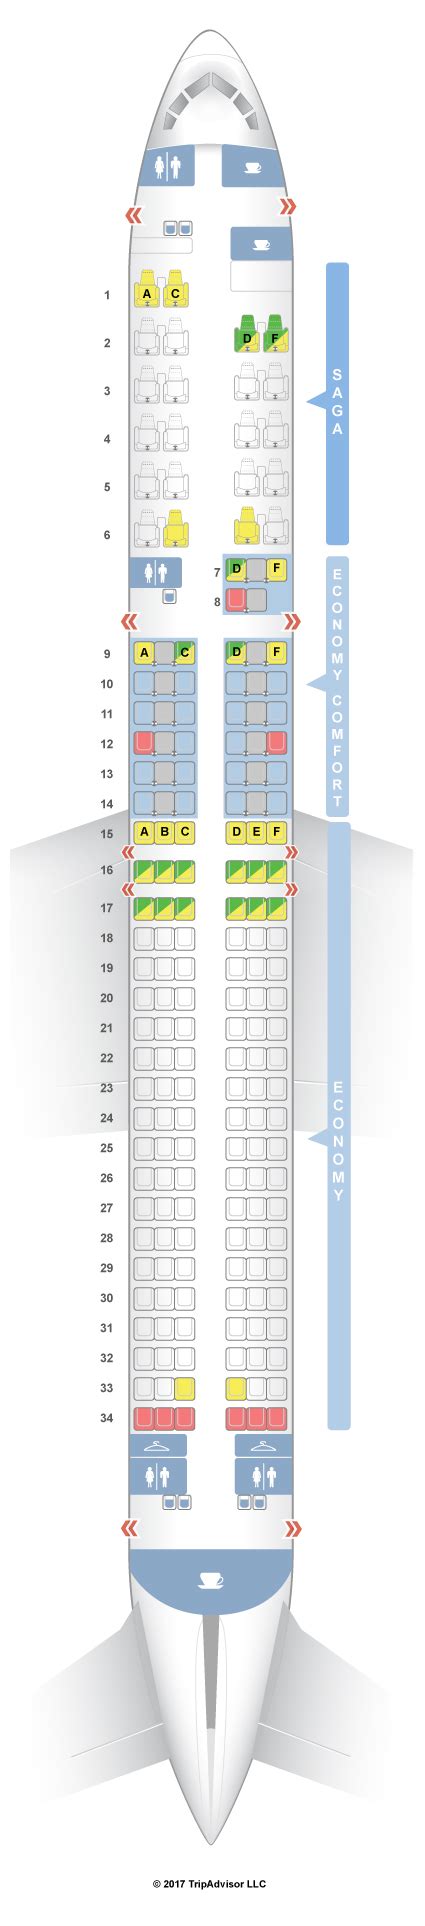 For your next Icelandair flight, use this seating chart to get the most comfortable seats, legroom, ... Boeing 757-200 (752) Layout 2; Boeing 757-300 (753)